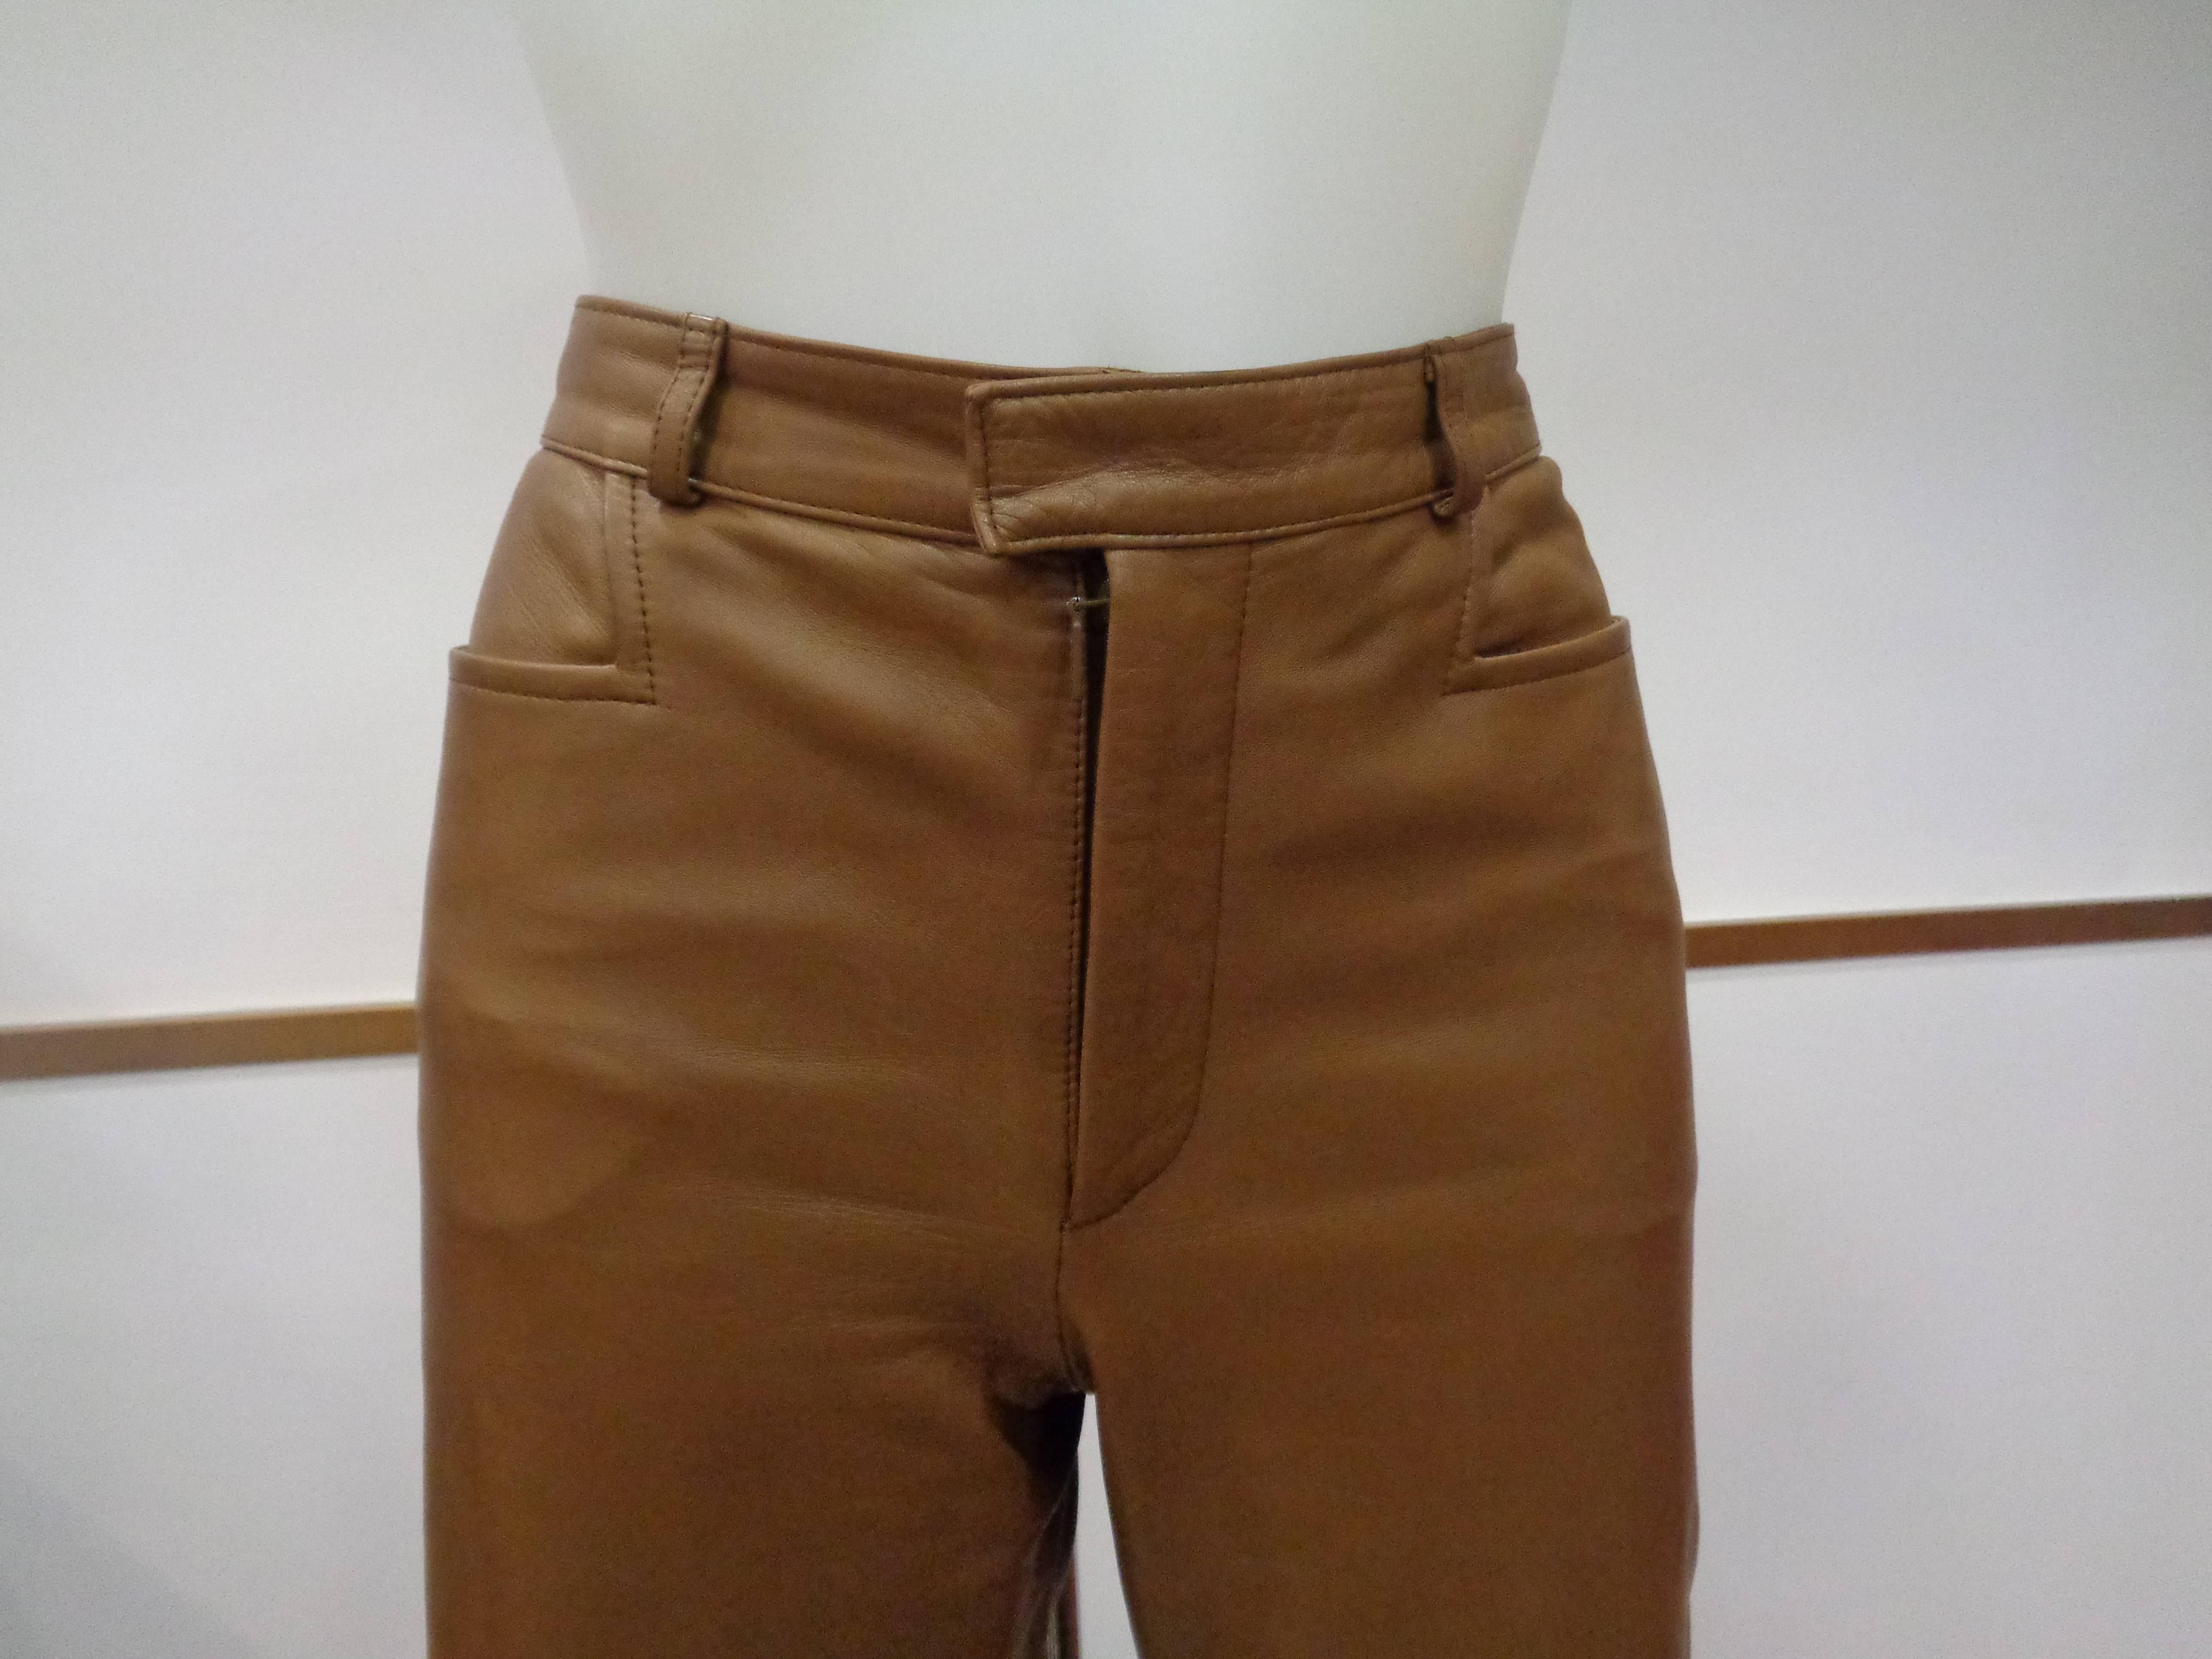 Gucci by Tom Ford Brown Leather Trousers

Totally made in italy in italian size range 42

Composition: 100% leather

Lining: Cupro